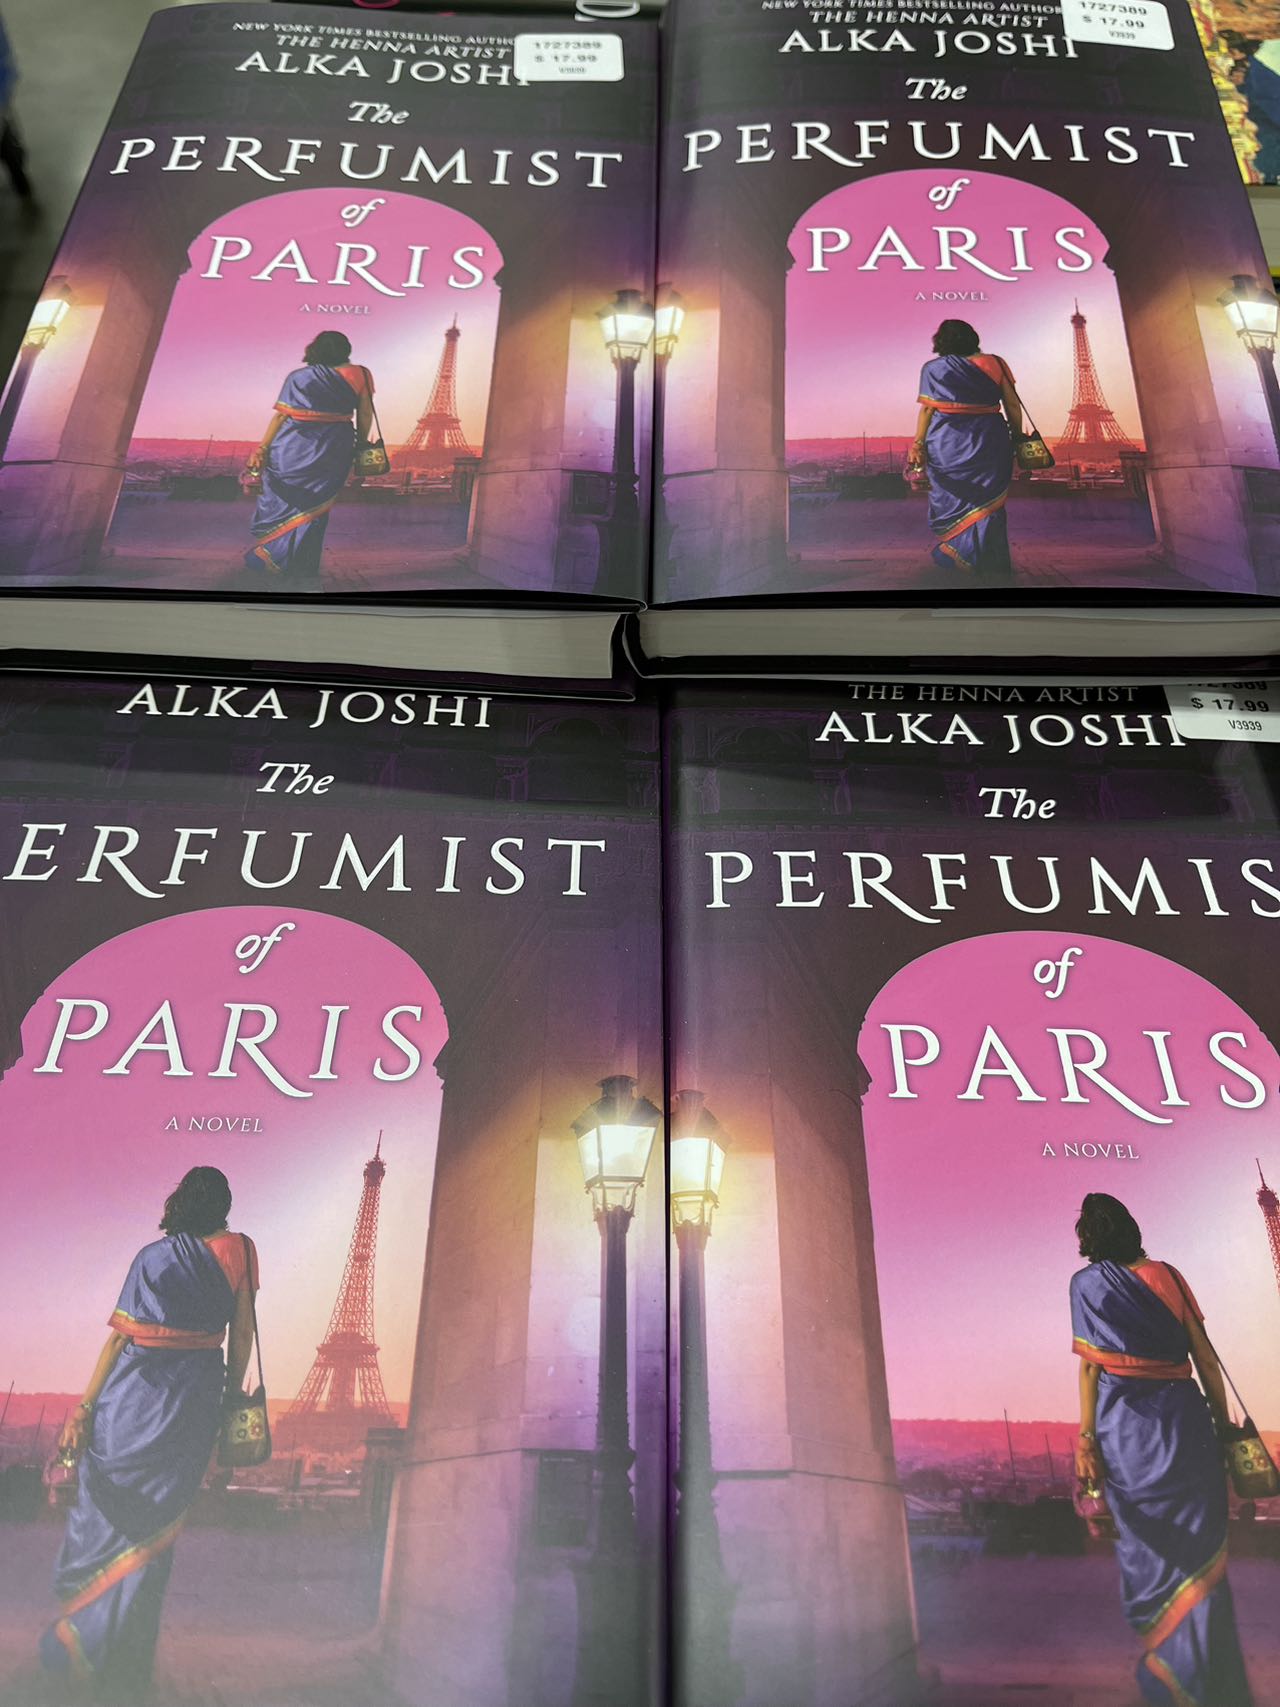 A Sensory Journey Through Love and Discovery: A Review of Alka Joshi's "The Perfumist of Paris"